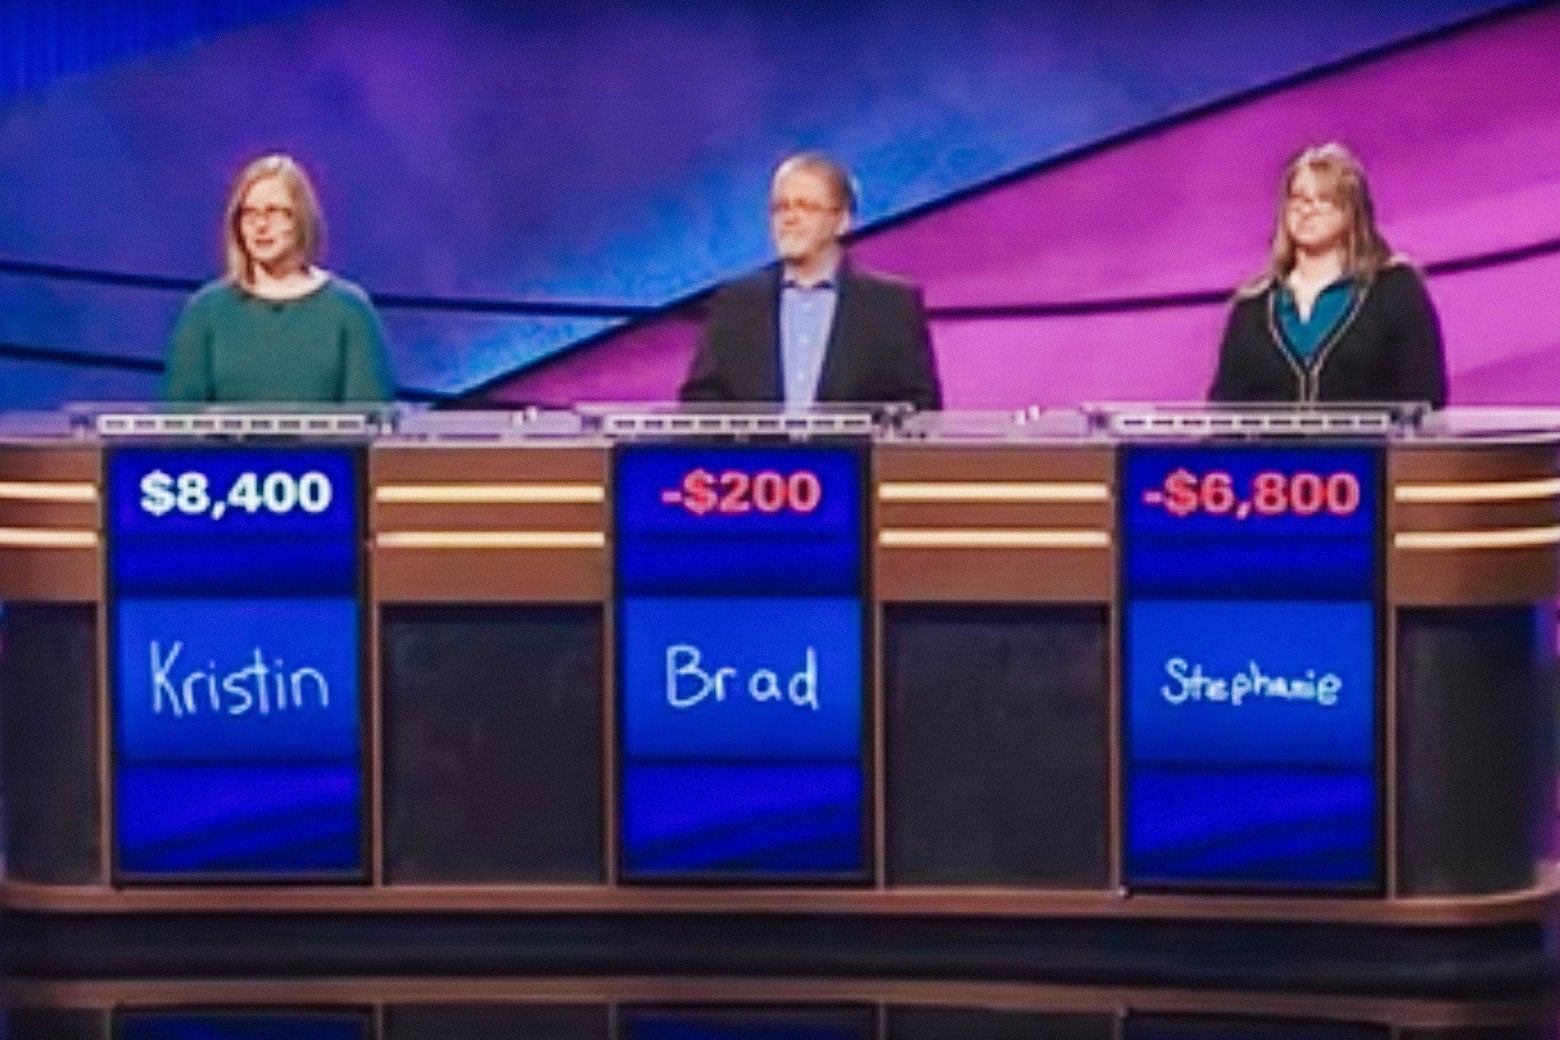 Three Jeopardy! contestants stand at their tables, with their scores and names displayed below.